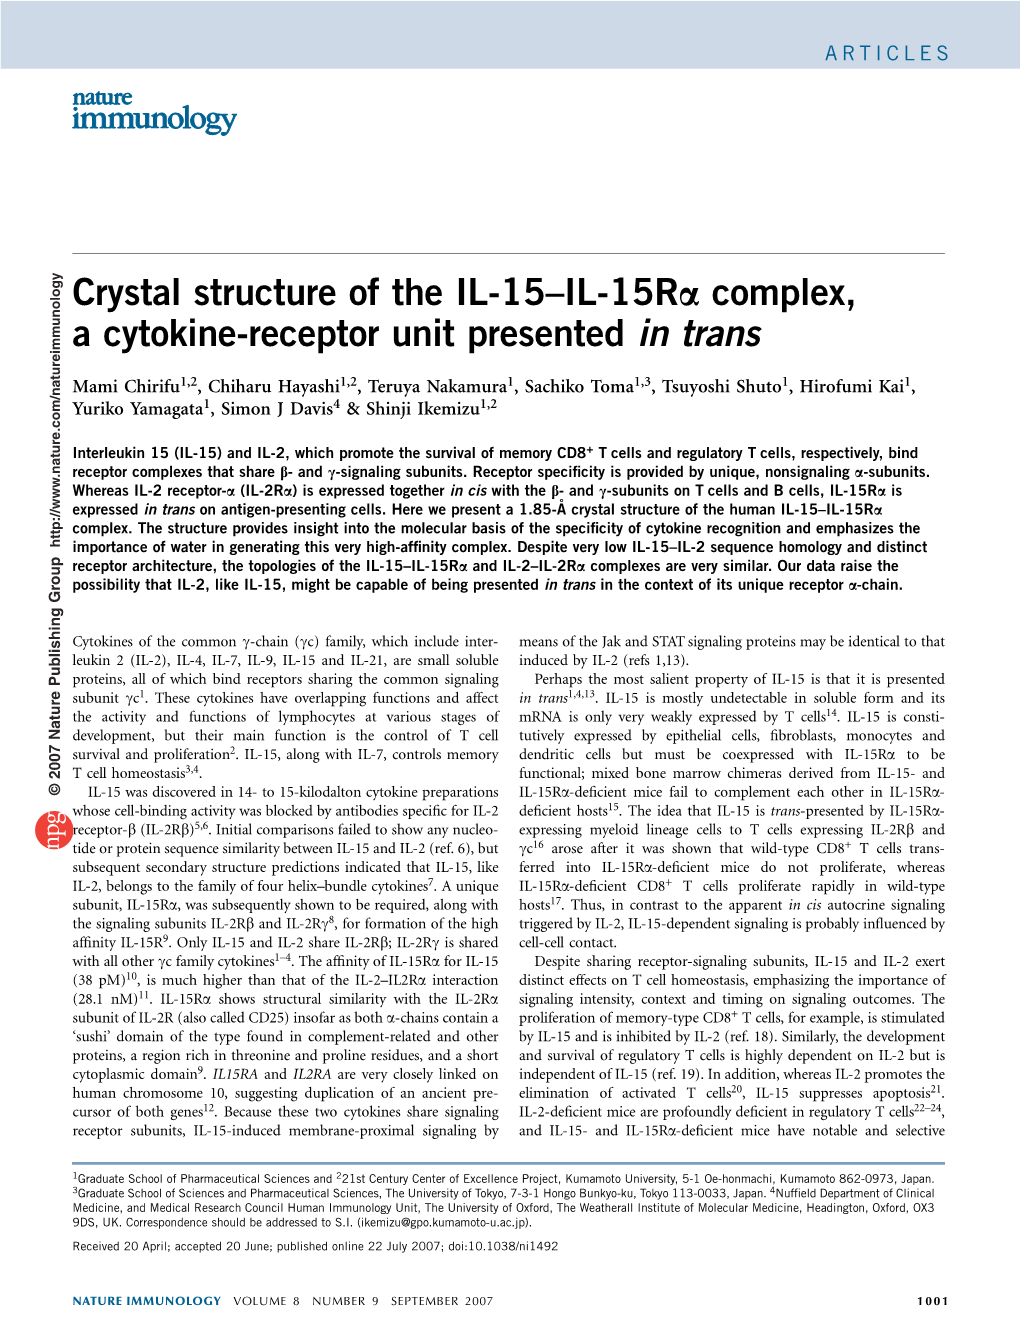 Crystal Structure of the IL-15–IL-15Ra Complex, a Cytokine-Receptor Unit Presented in Trans